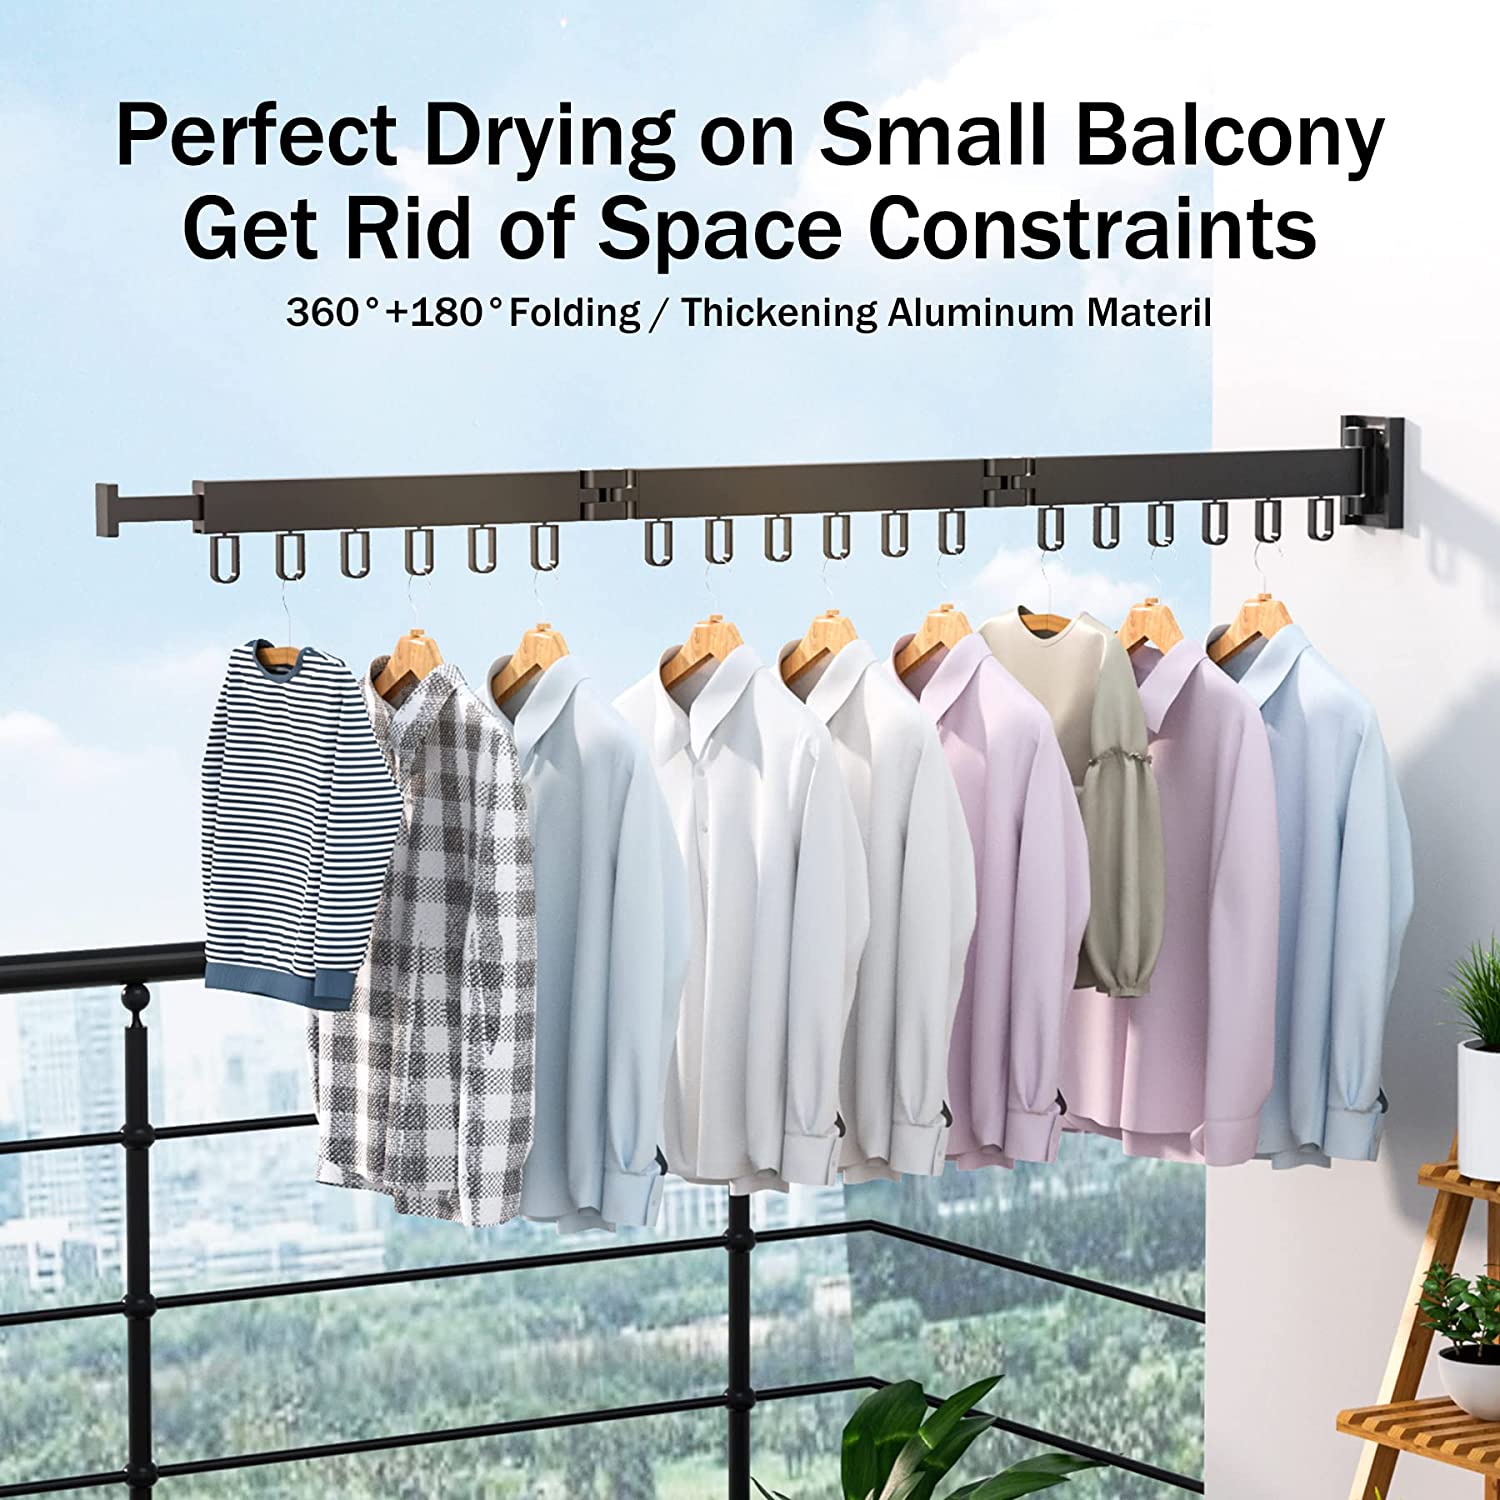 Wall Mounted Clothes Dryer, Collapsible Clothes Hanger, Retractable Drying Rack Indoor Outdoor Space Saving Clothes Rack, Retractable Clothes Dryers